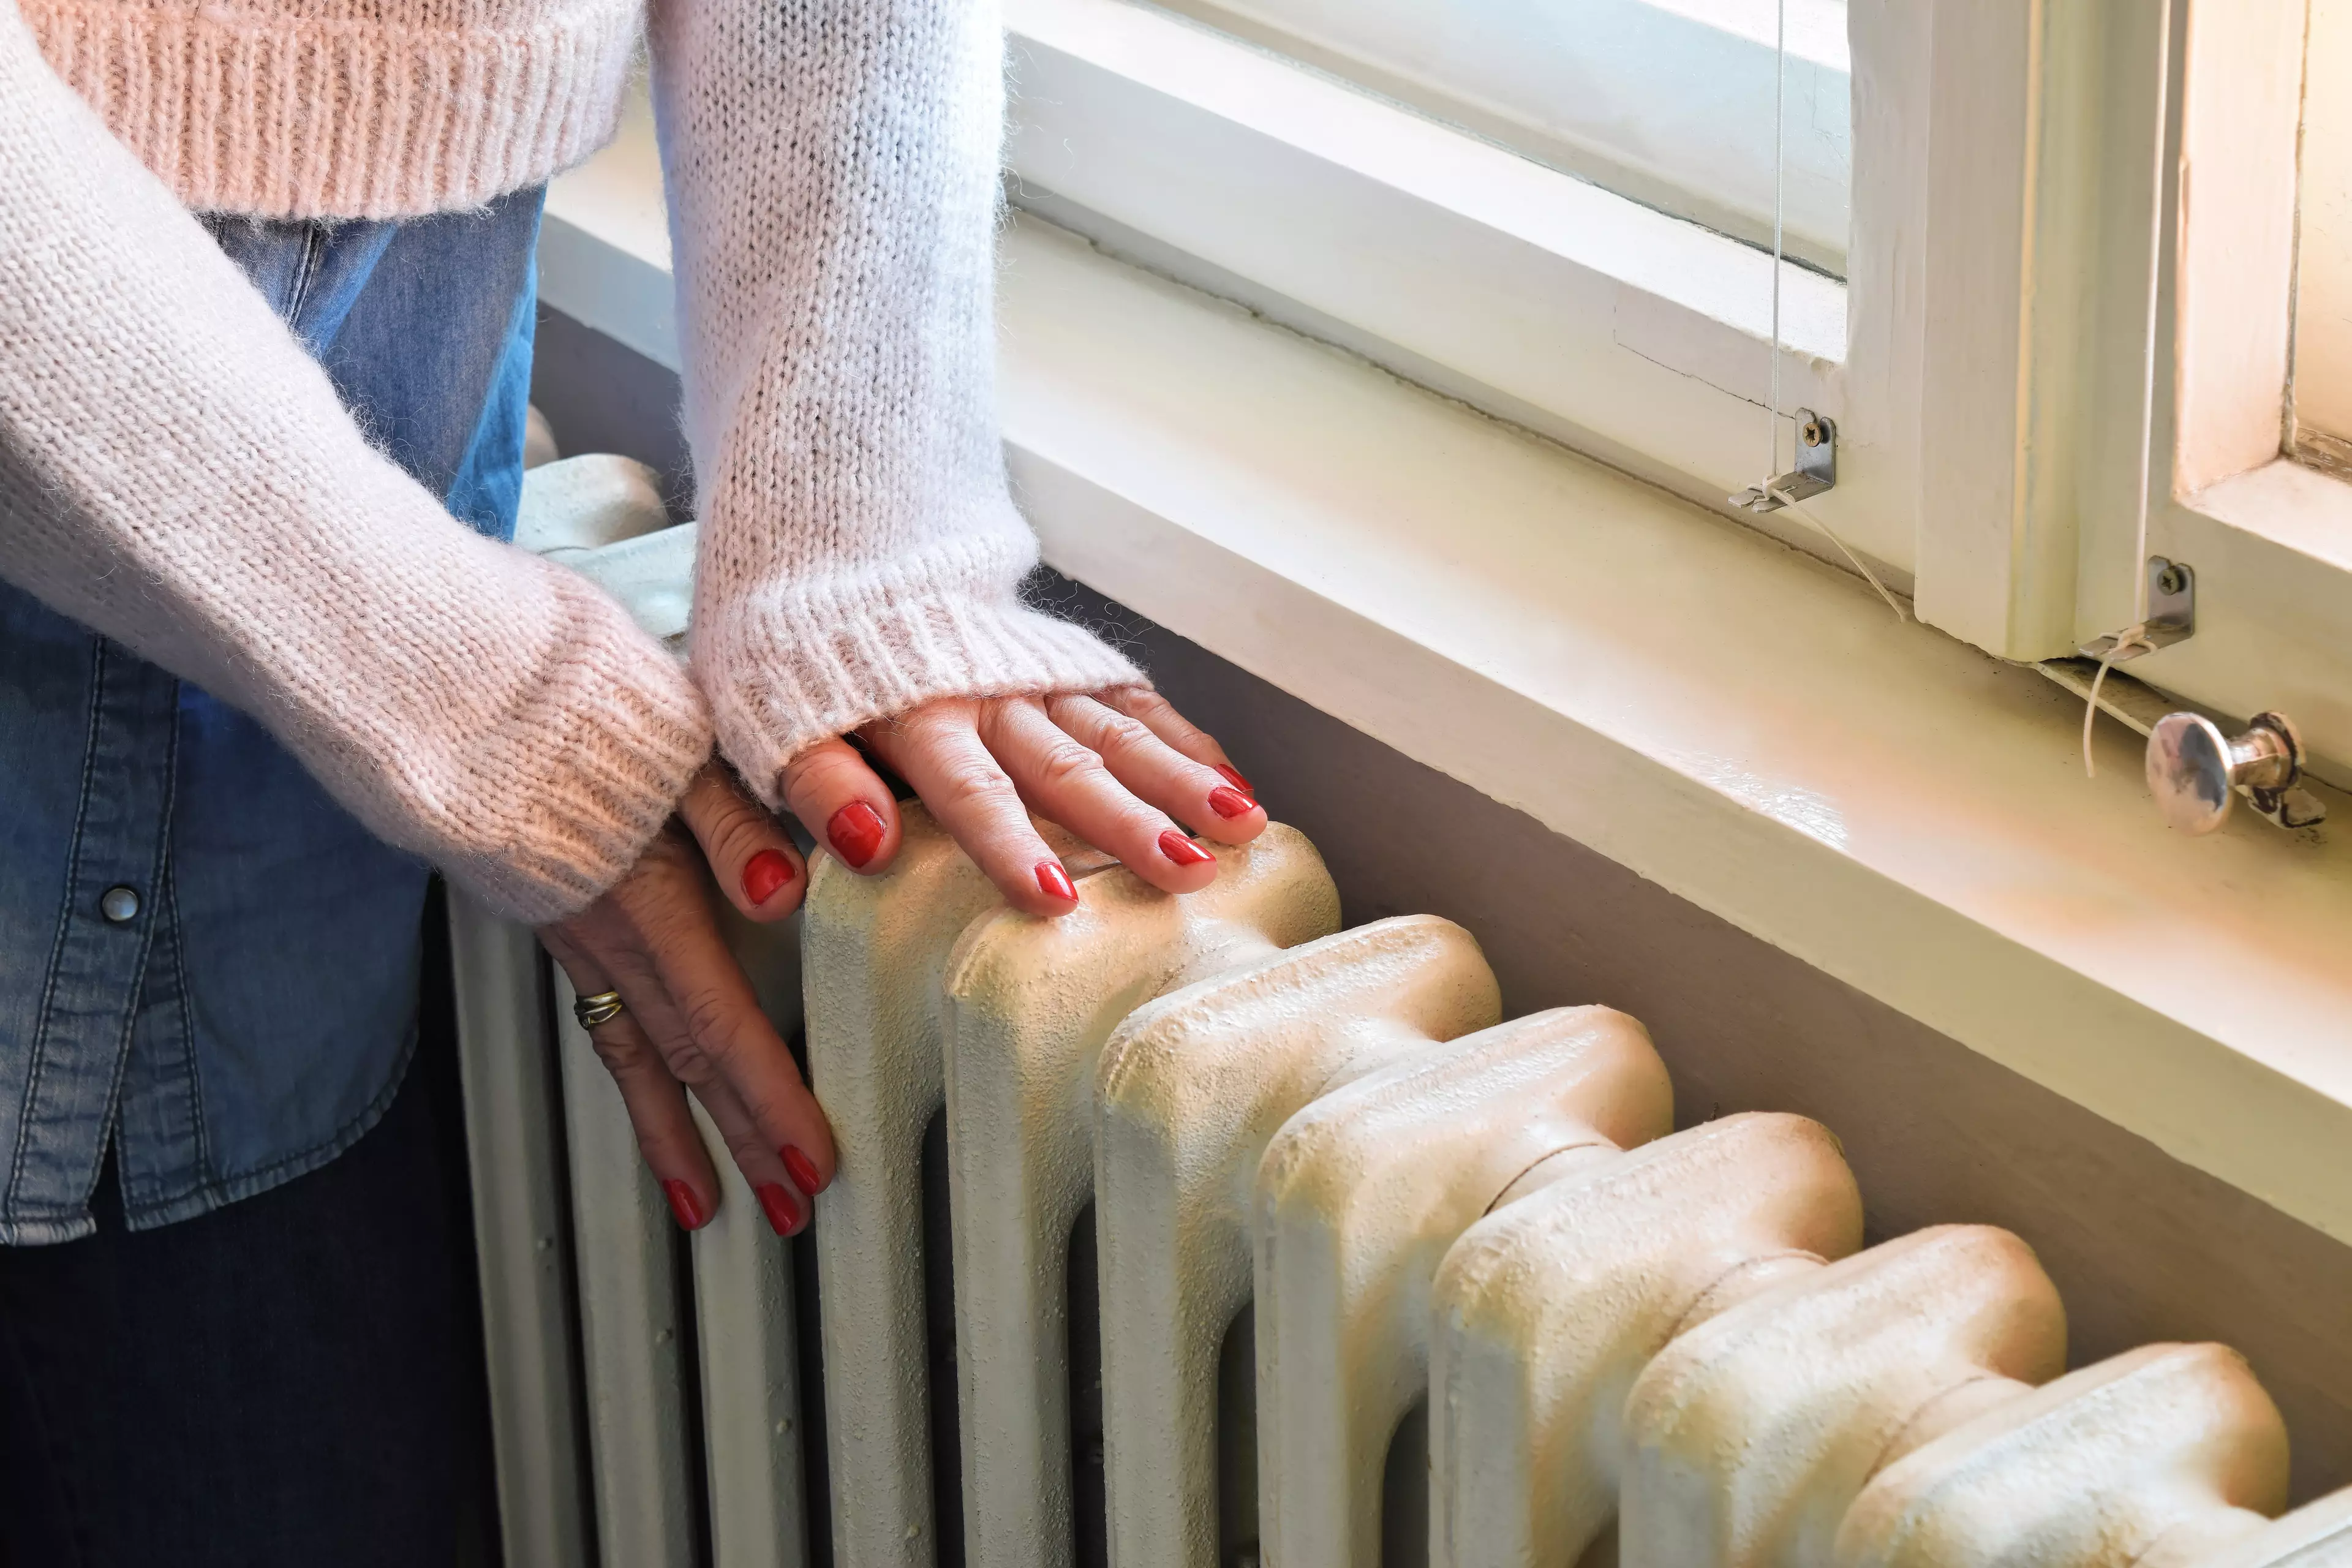 Your central heating could also be to blame (